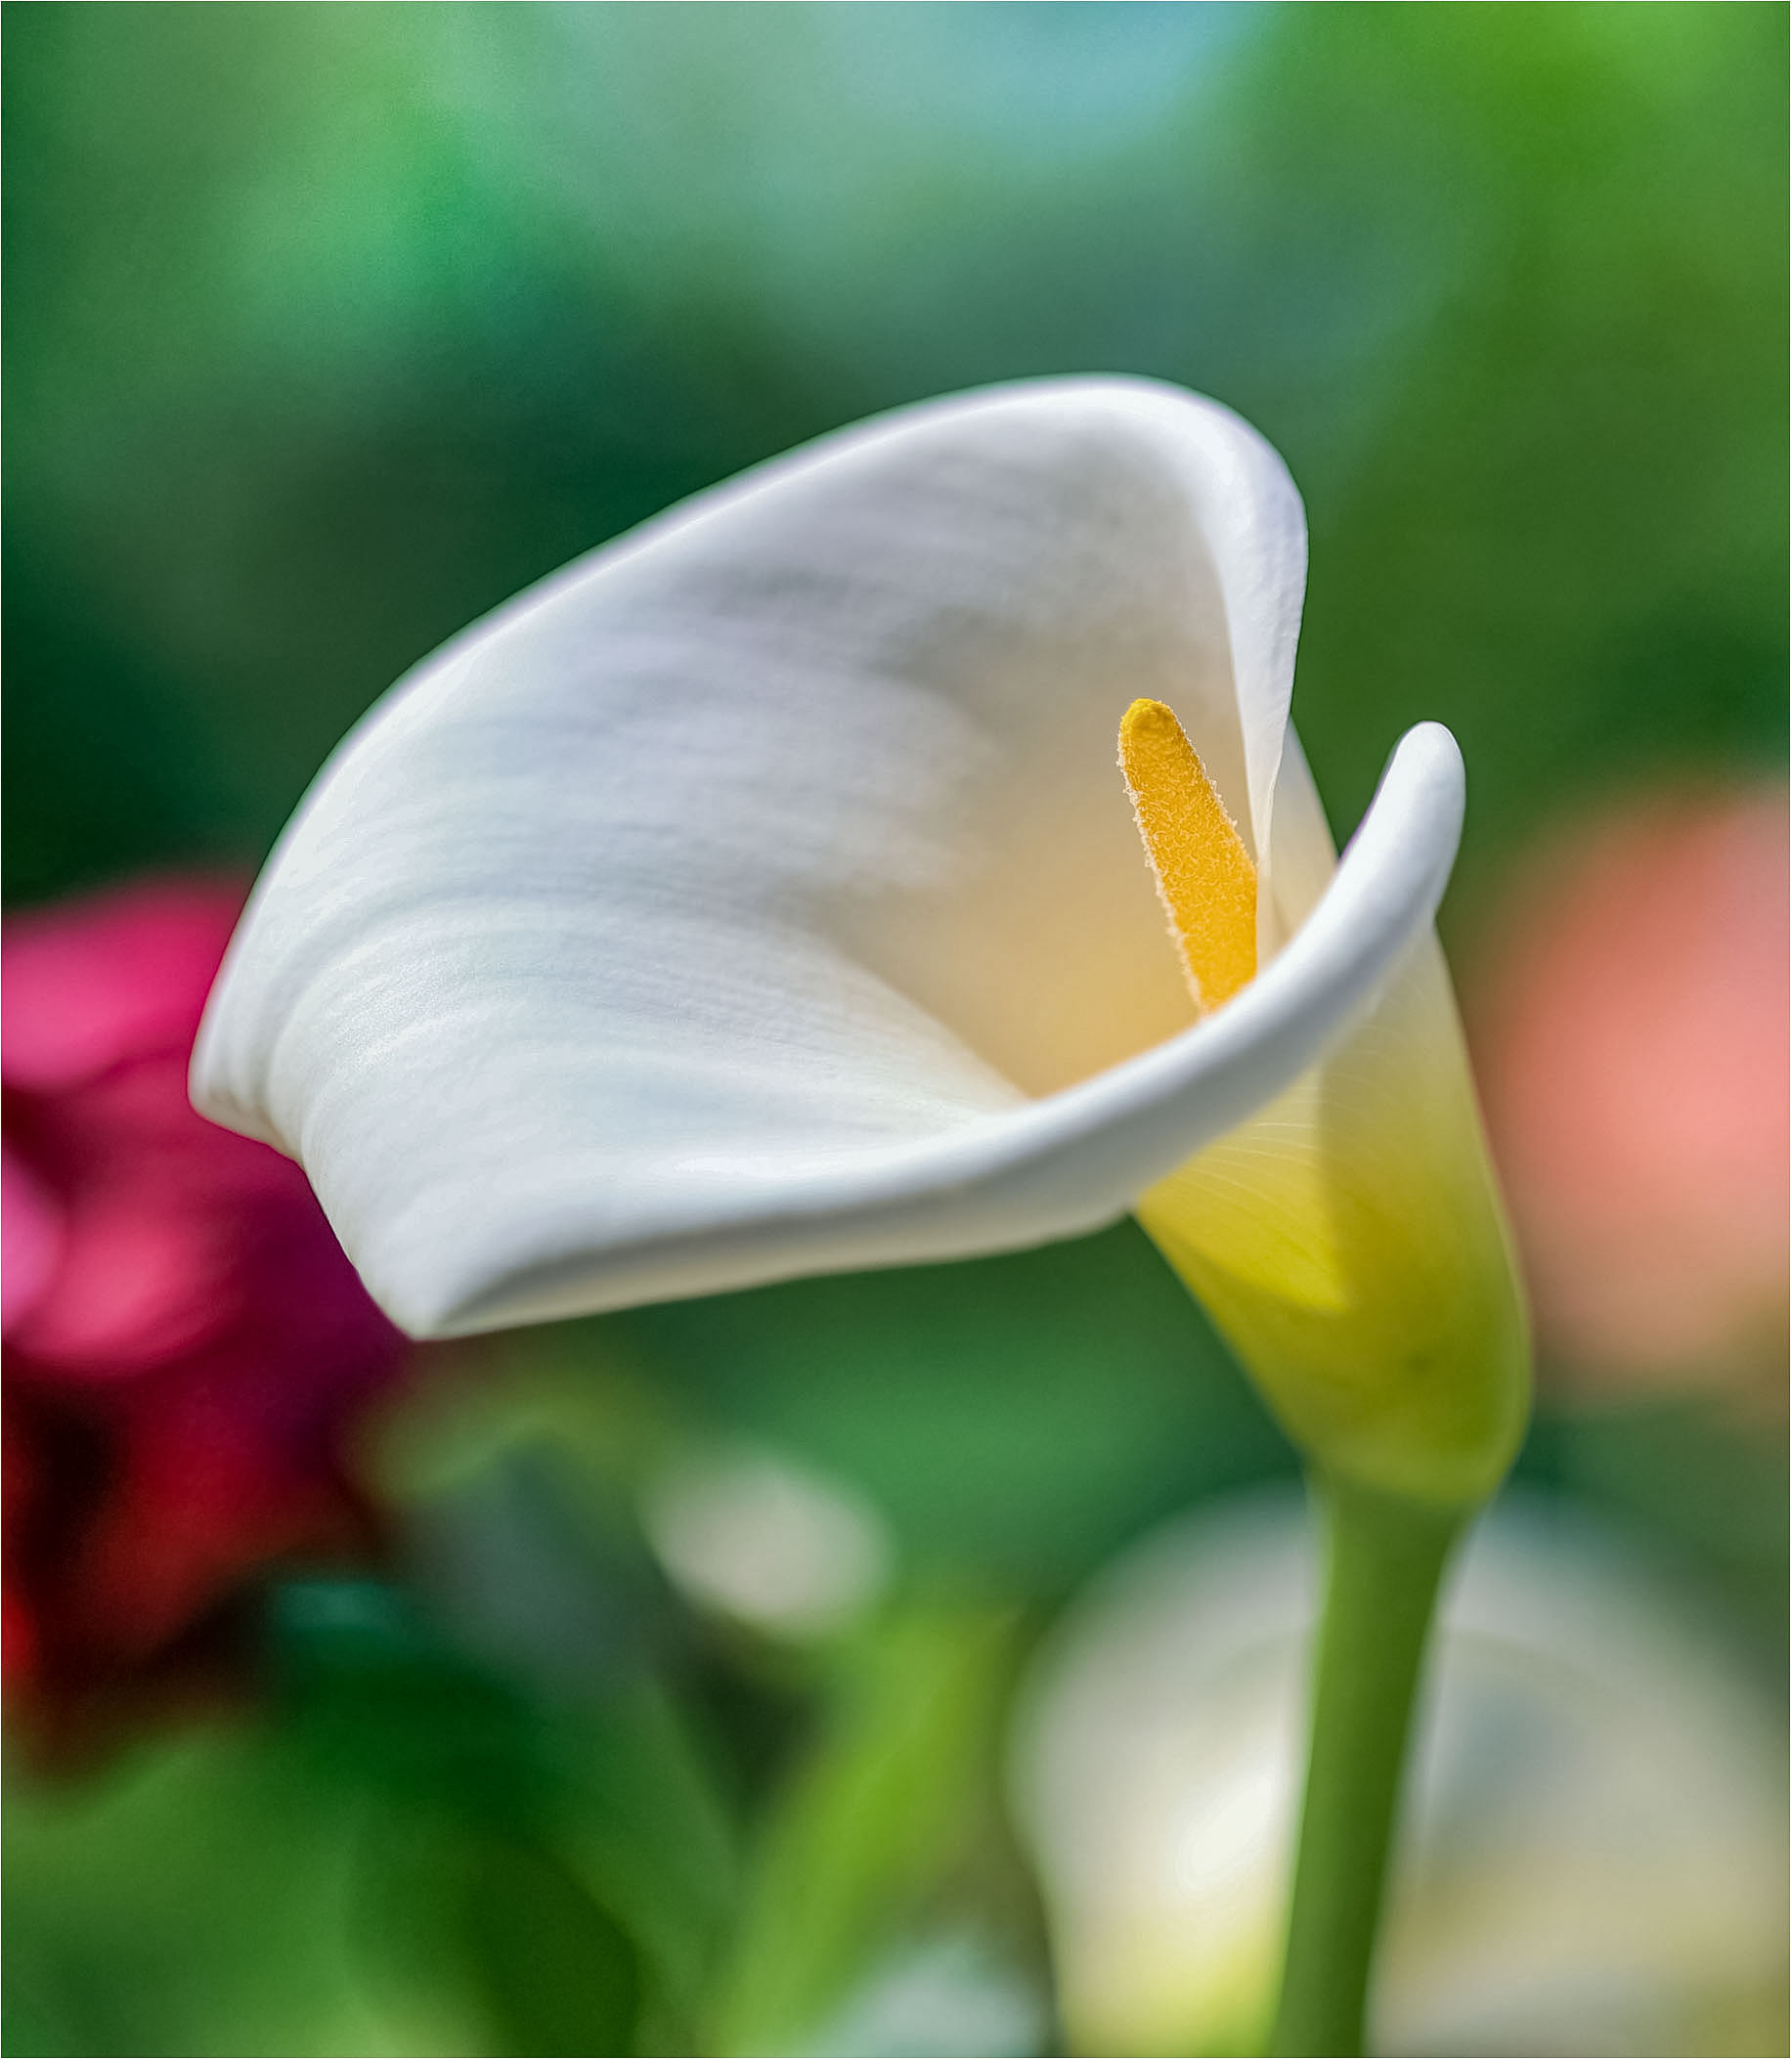 Romantic Flowers: Calla Lily Meaning...